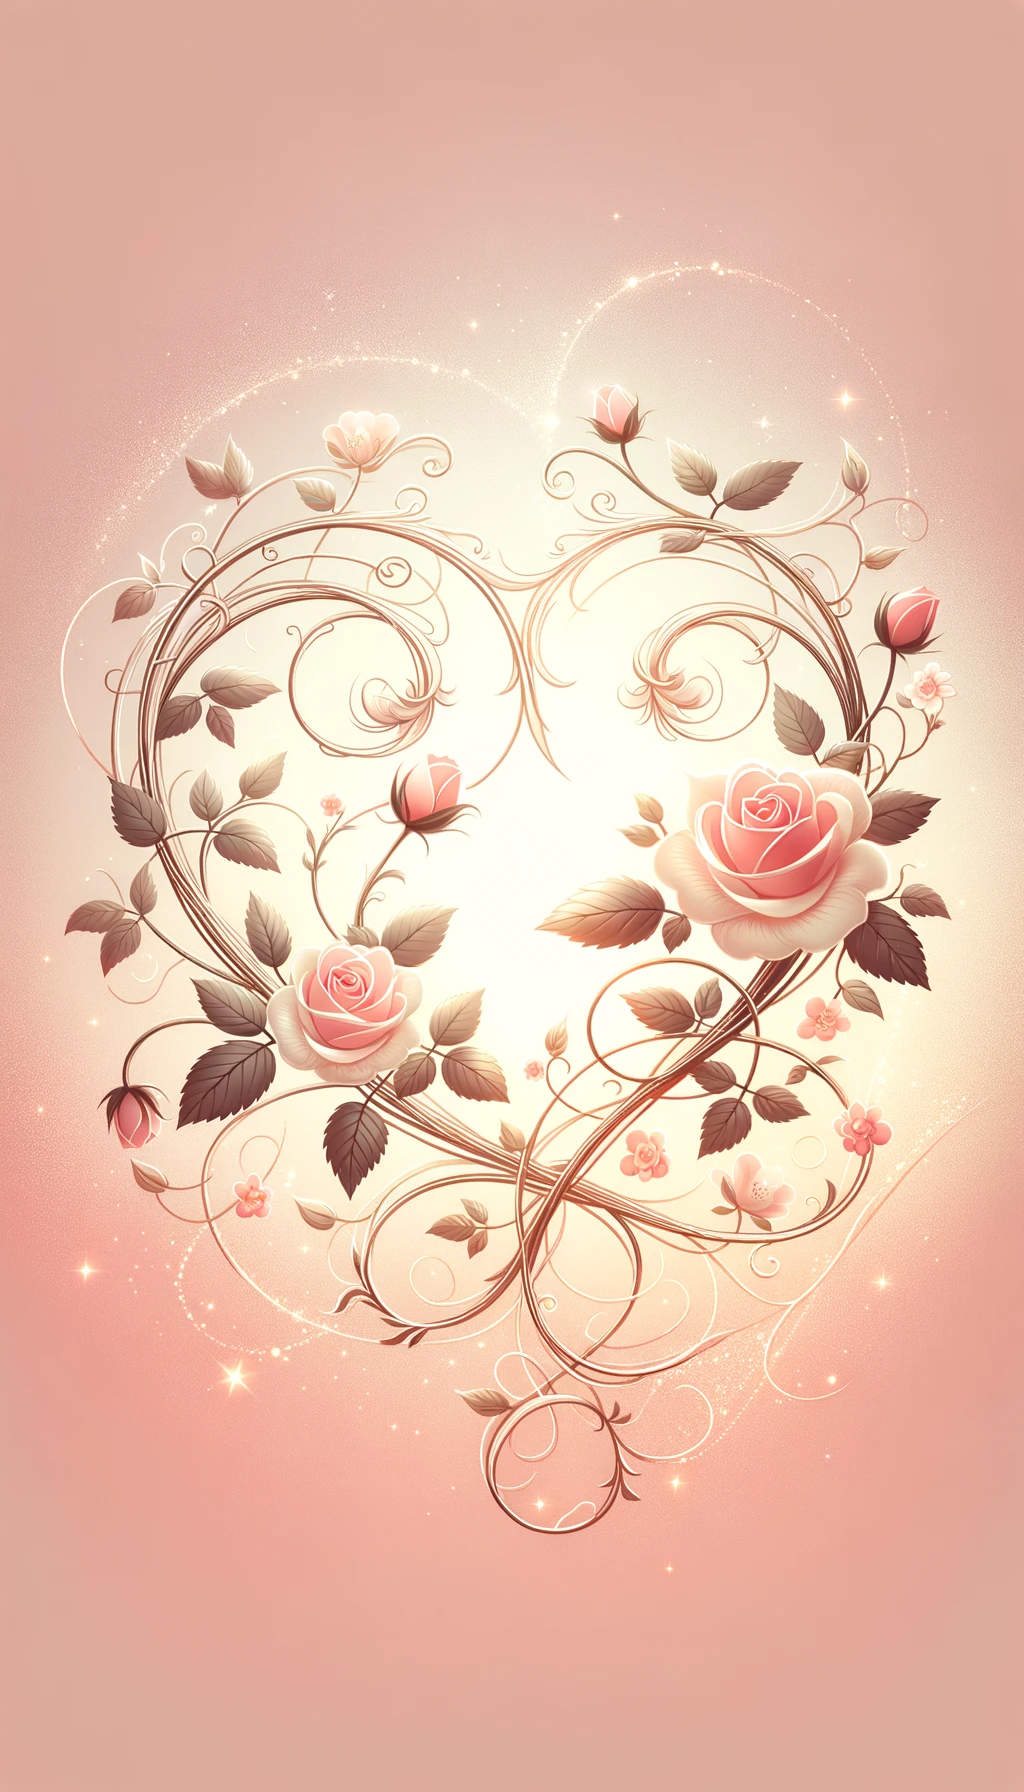 love image for wallpaper. heart, magical